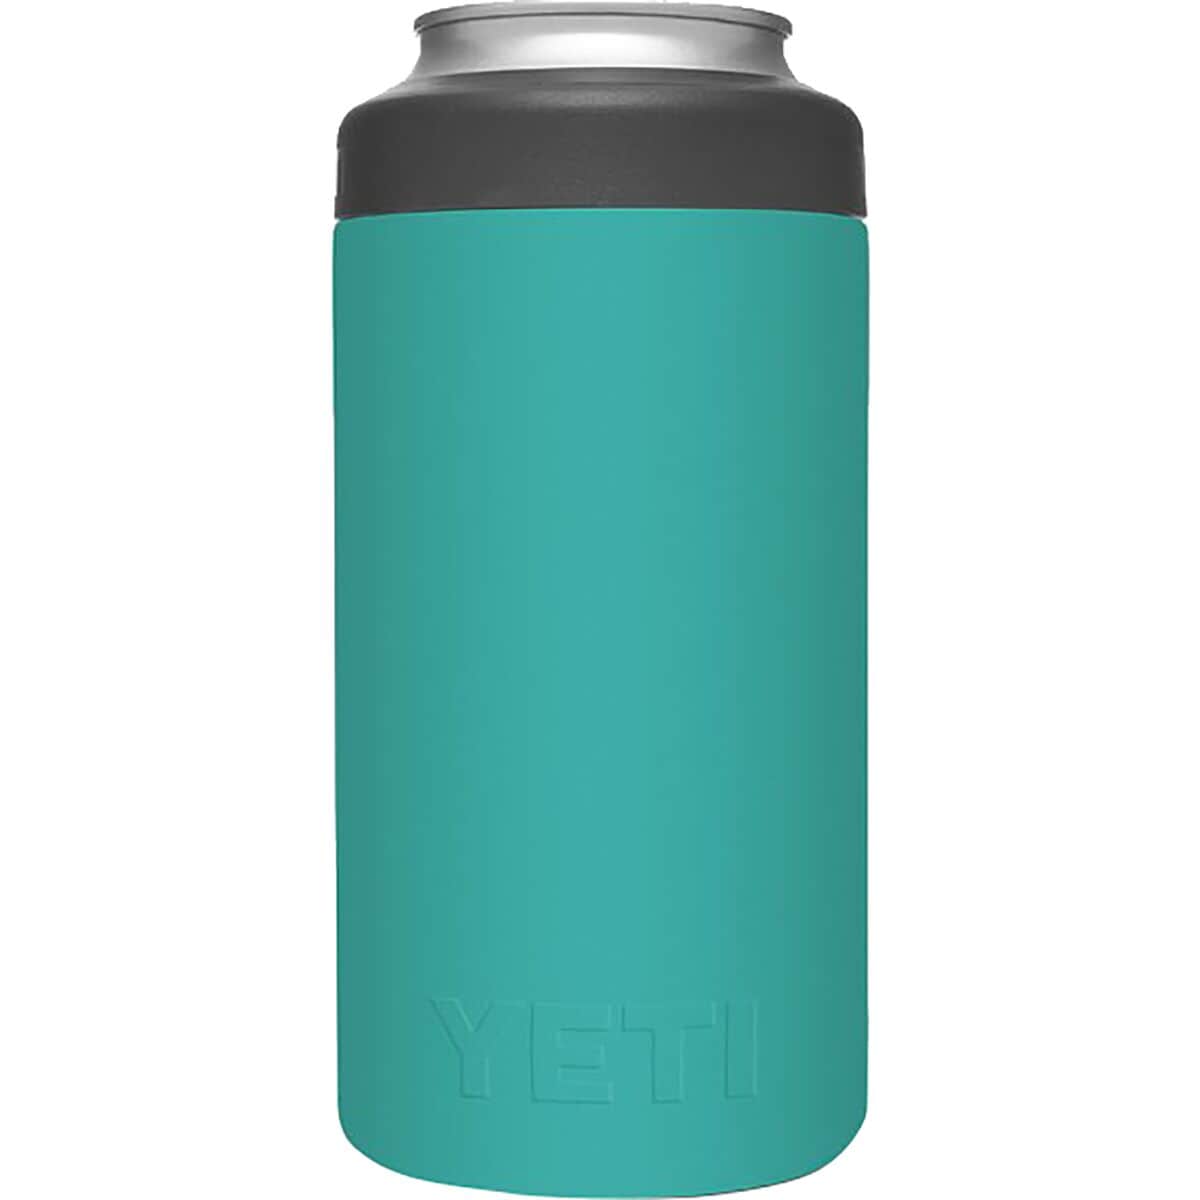 YETI Rambler Colster Can and Bottle Holder One Size 12Oz